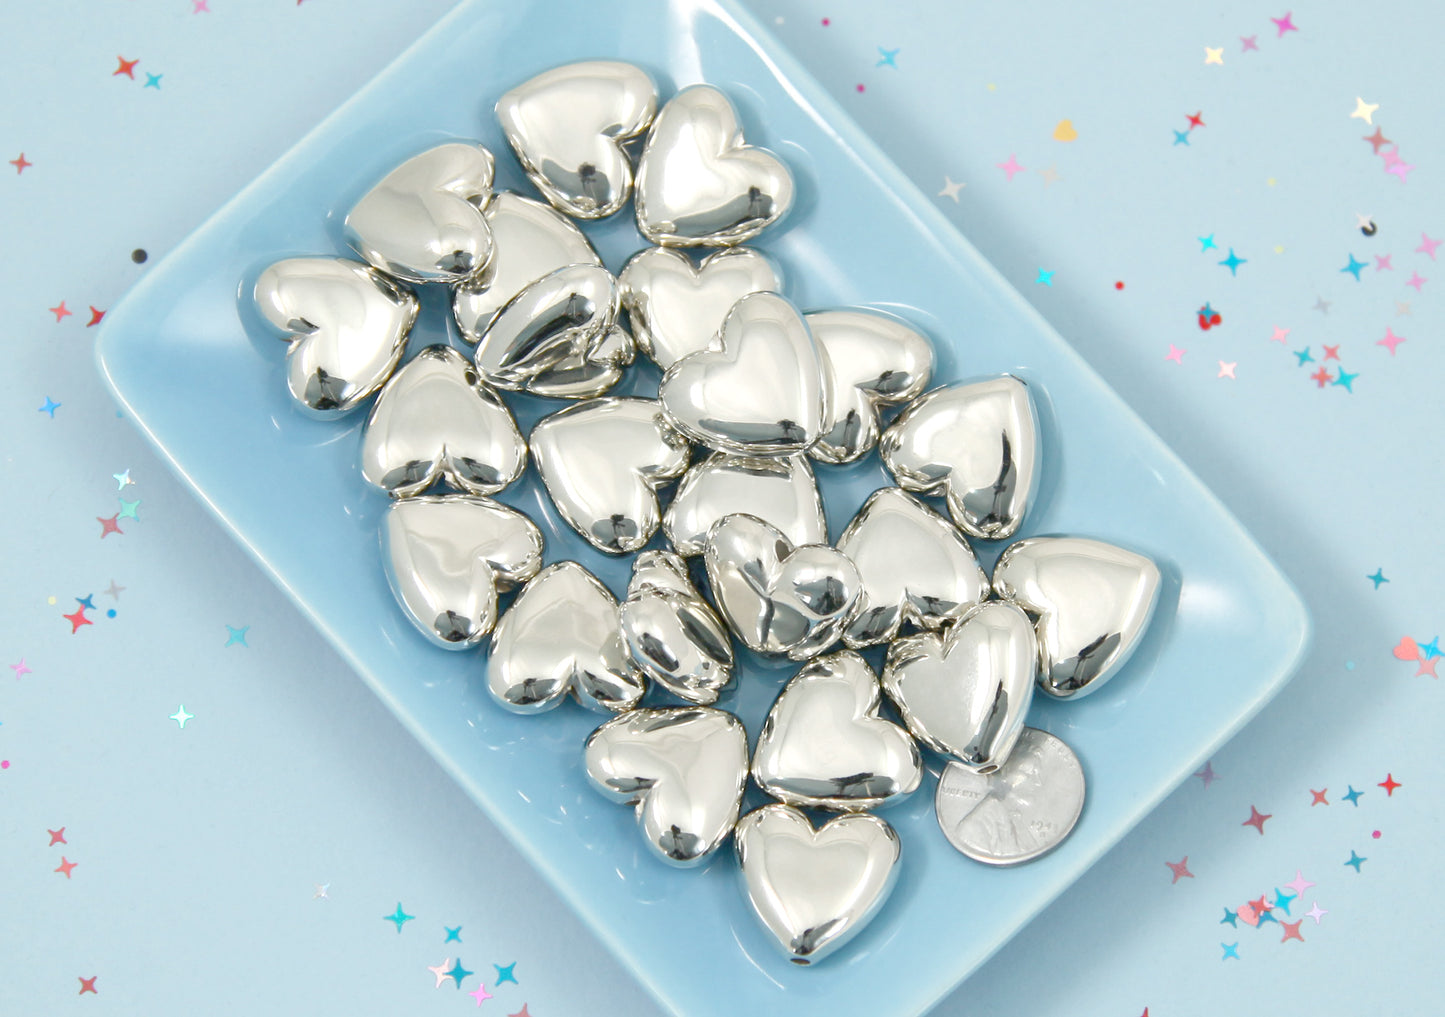 Big Silver Heart Beads - 22mm Electroplated Plastic Silver Heart Beads - Easy to Make into Jewelry - 12 pc set